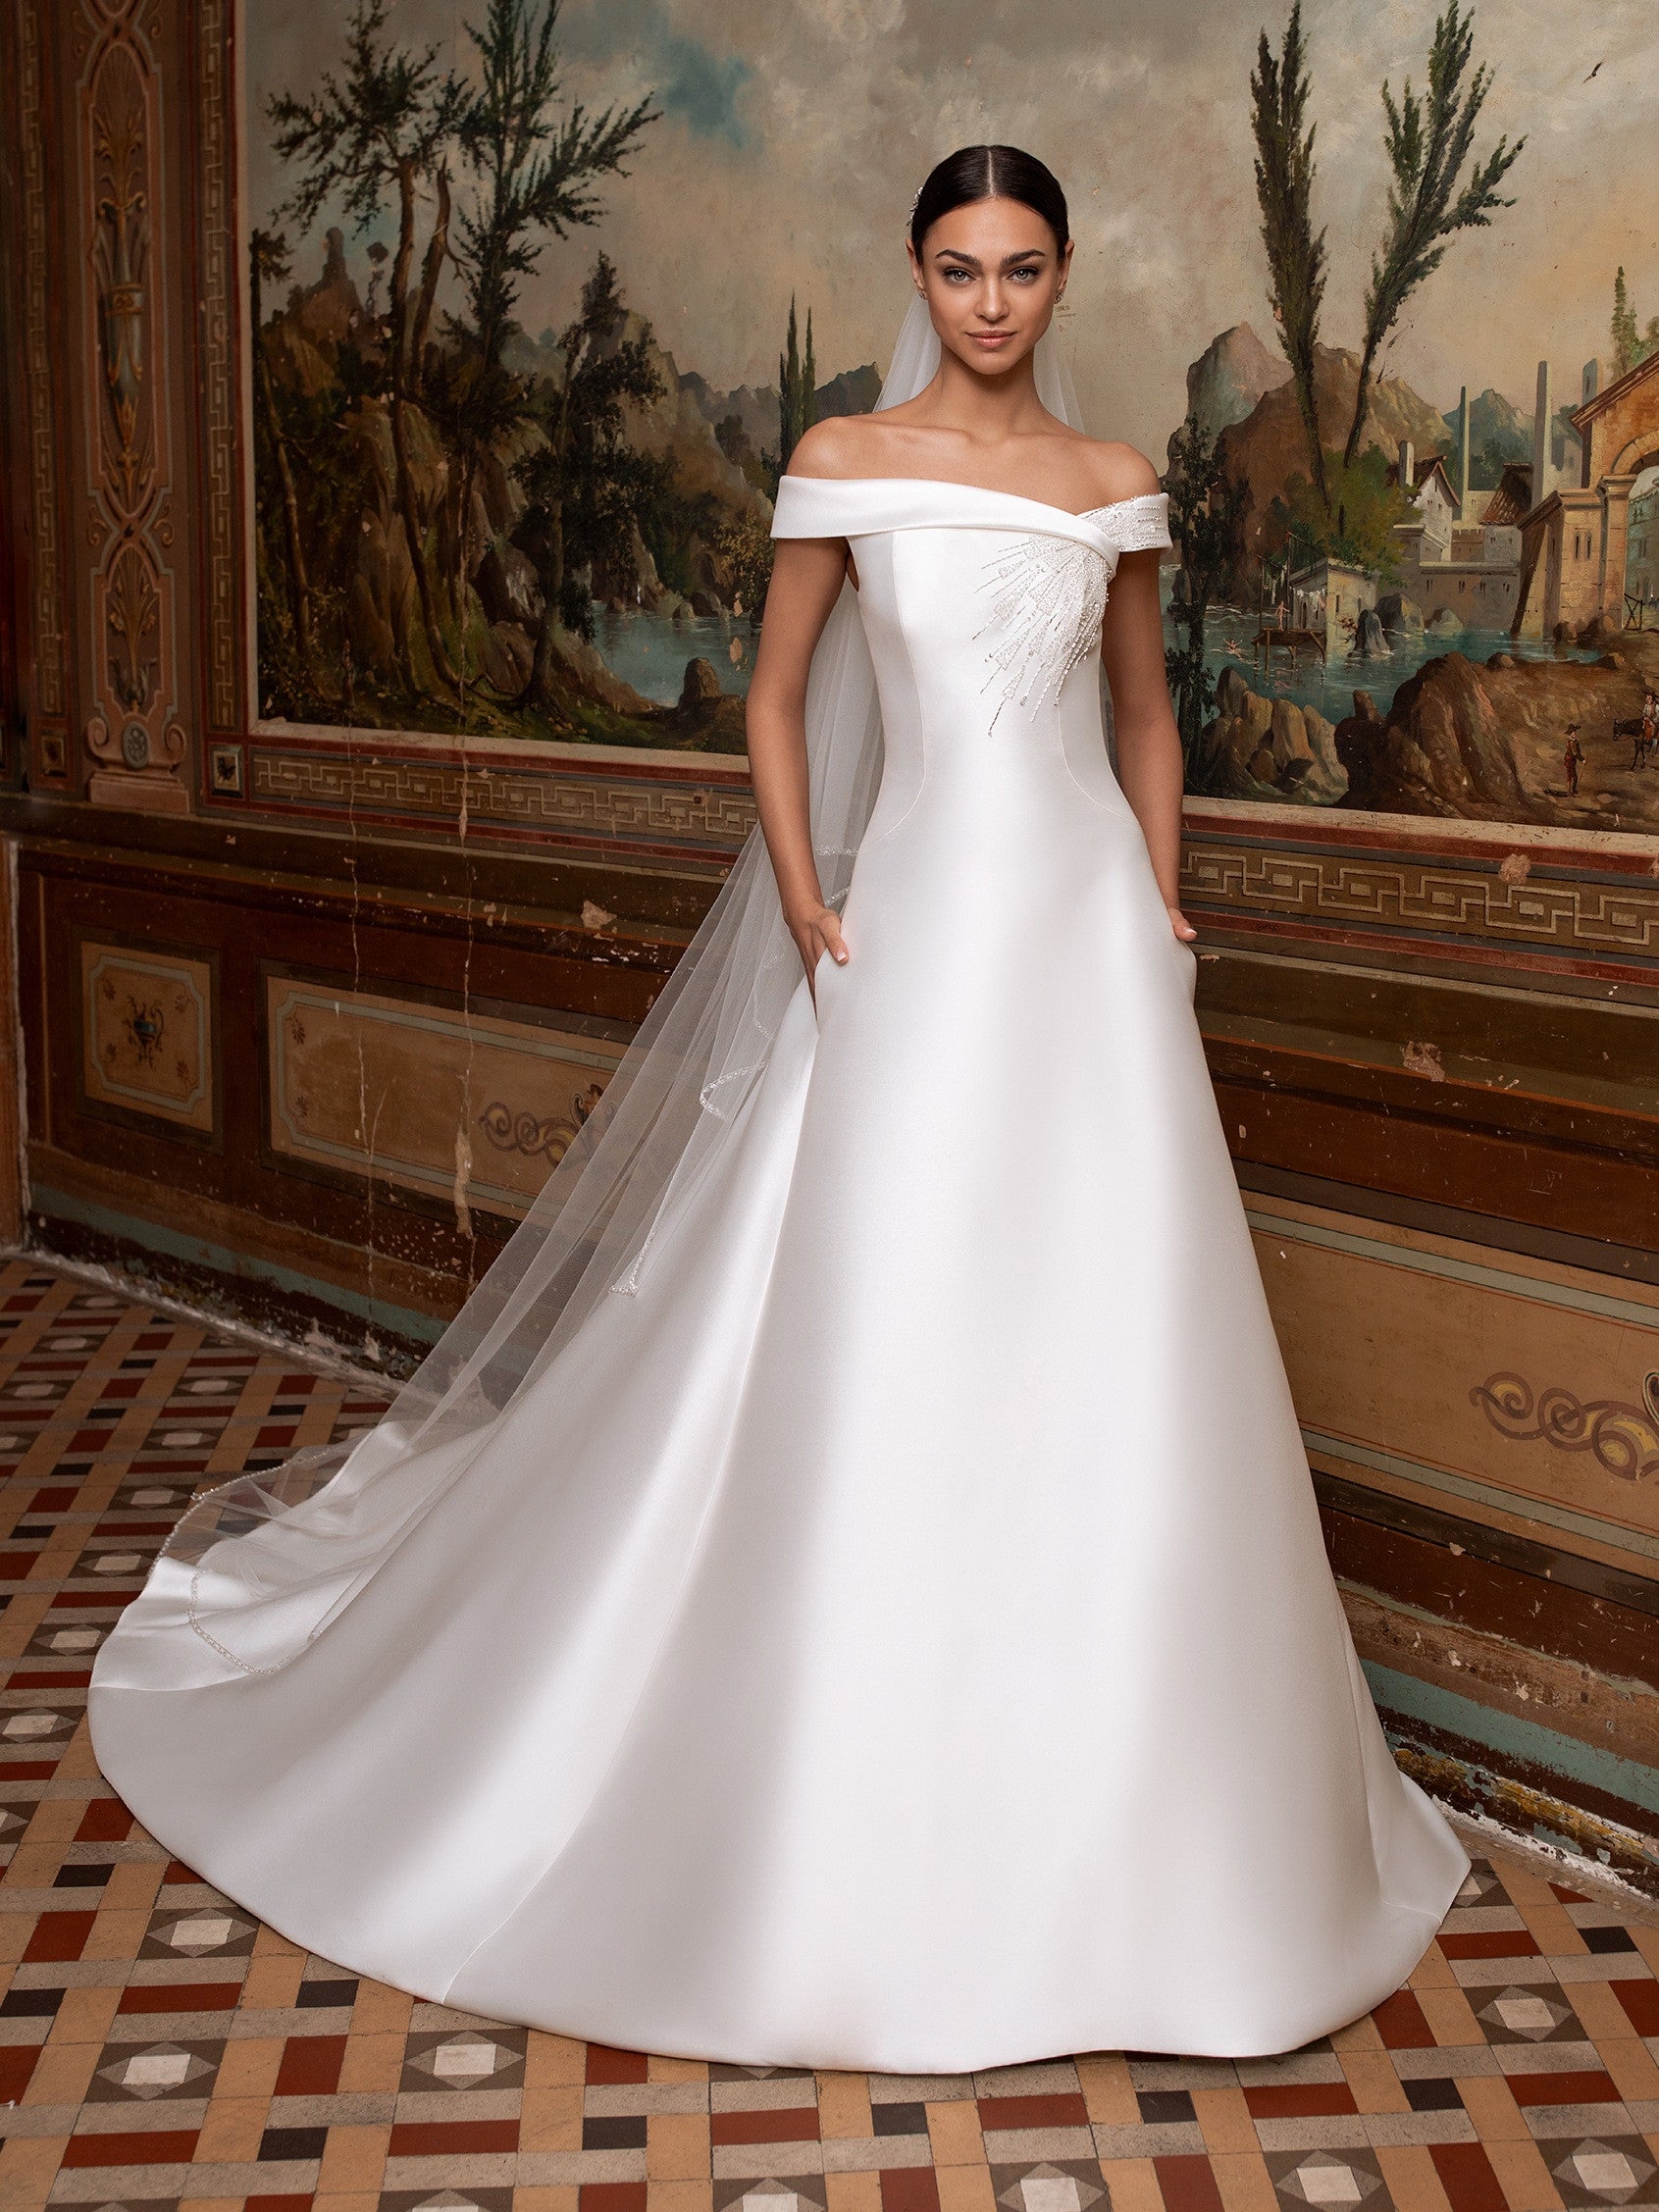 A-line wedding dress with off-the-shoulder sleeves